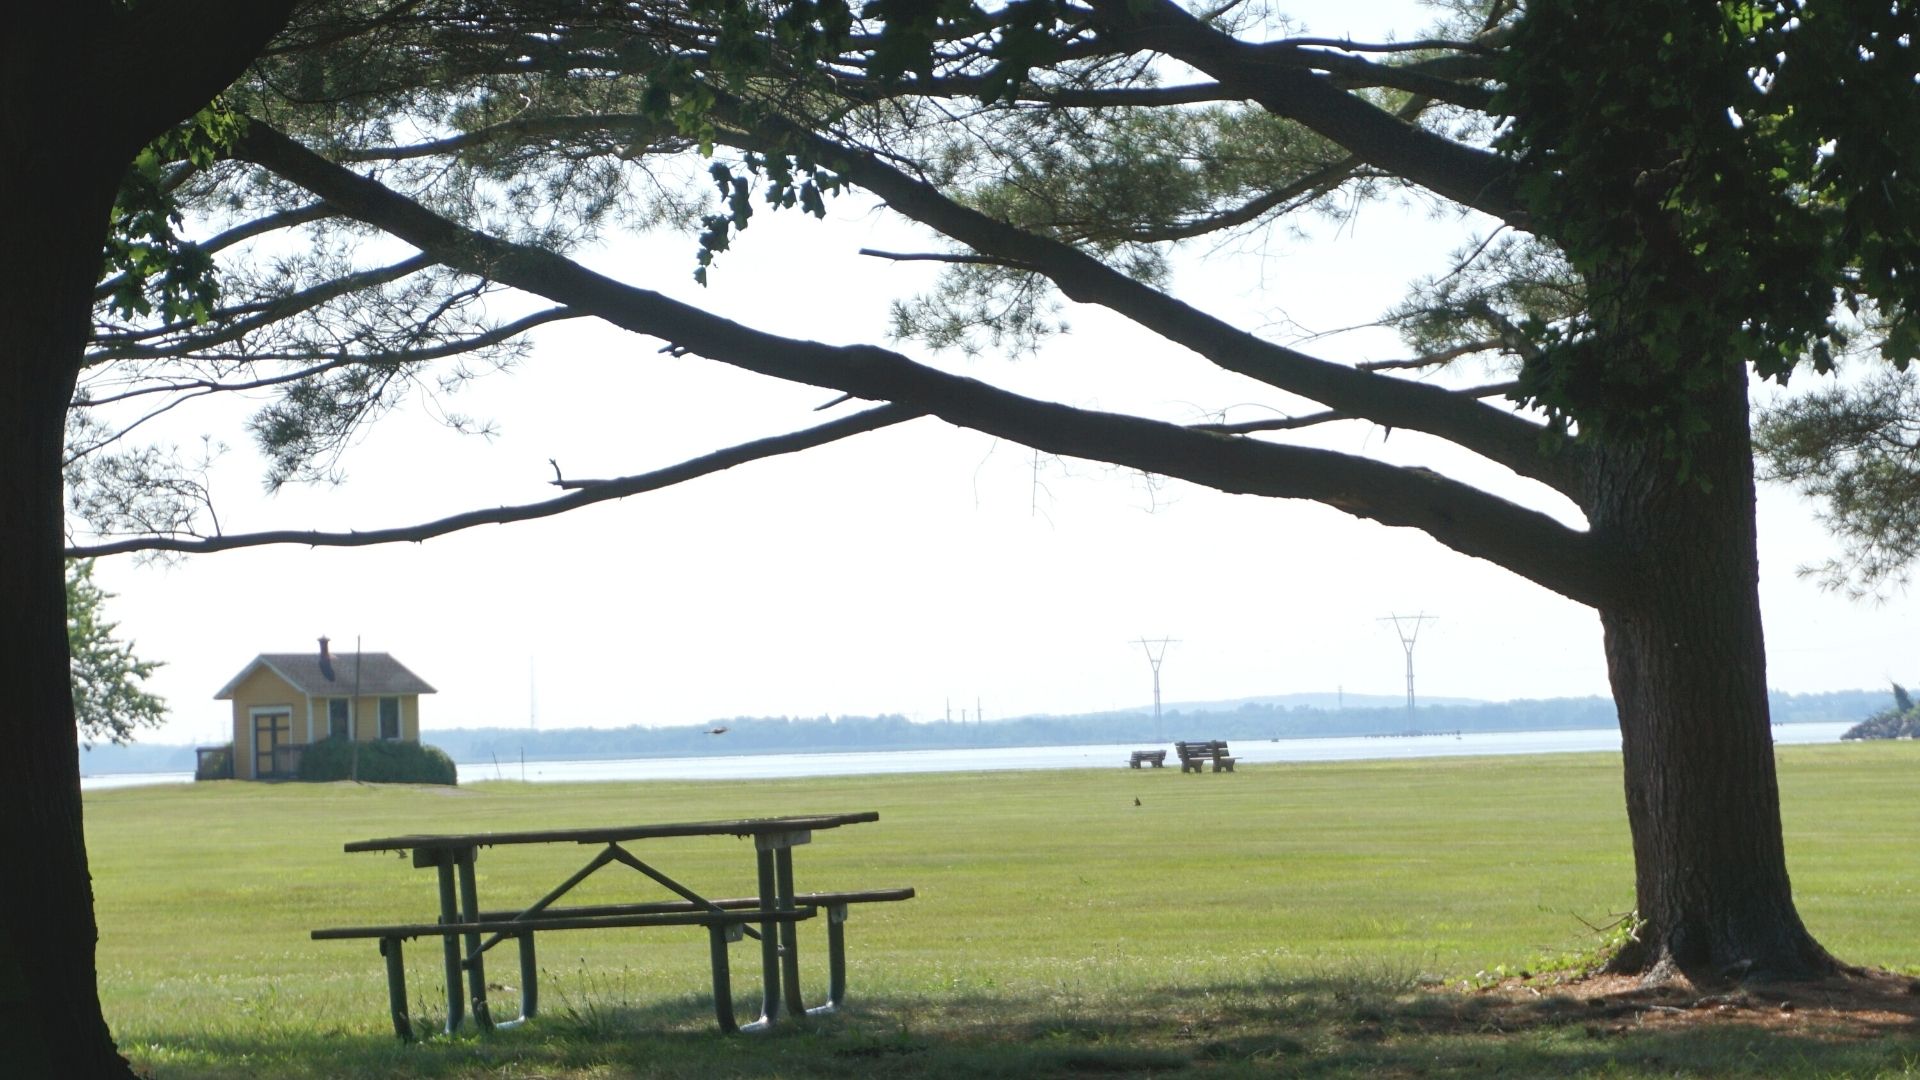 Fort Mott State Park in Pennsville NJ picnic table under trees with open grassy area 1